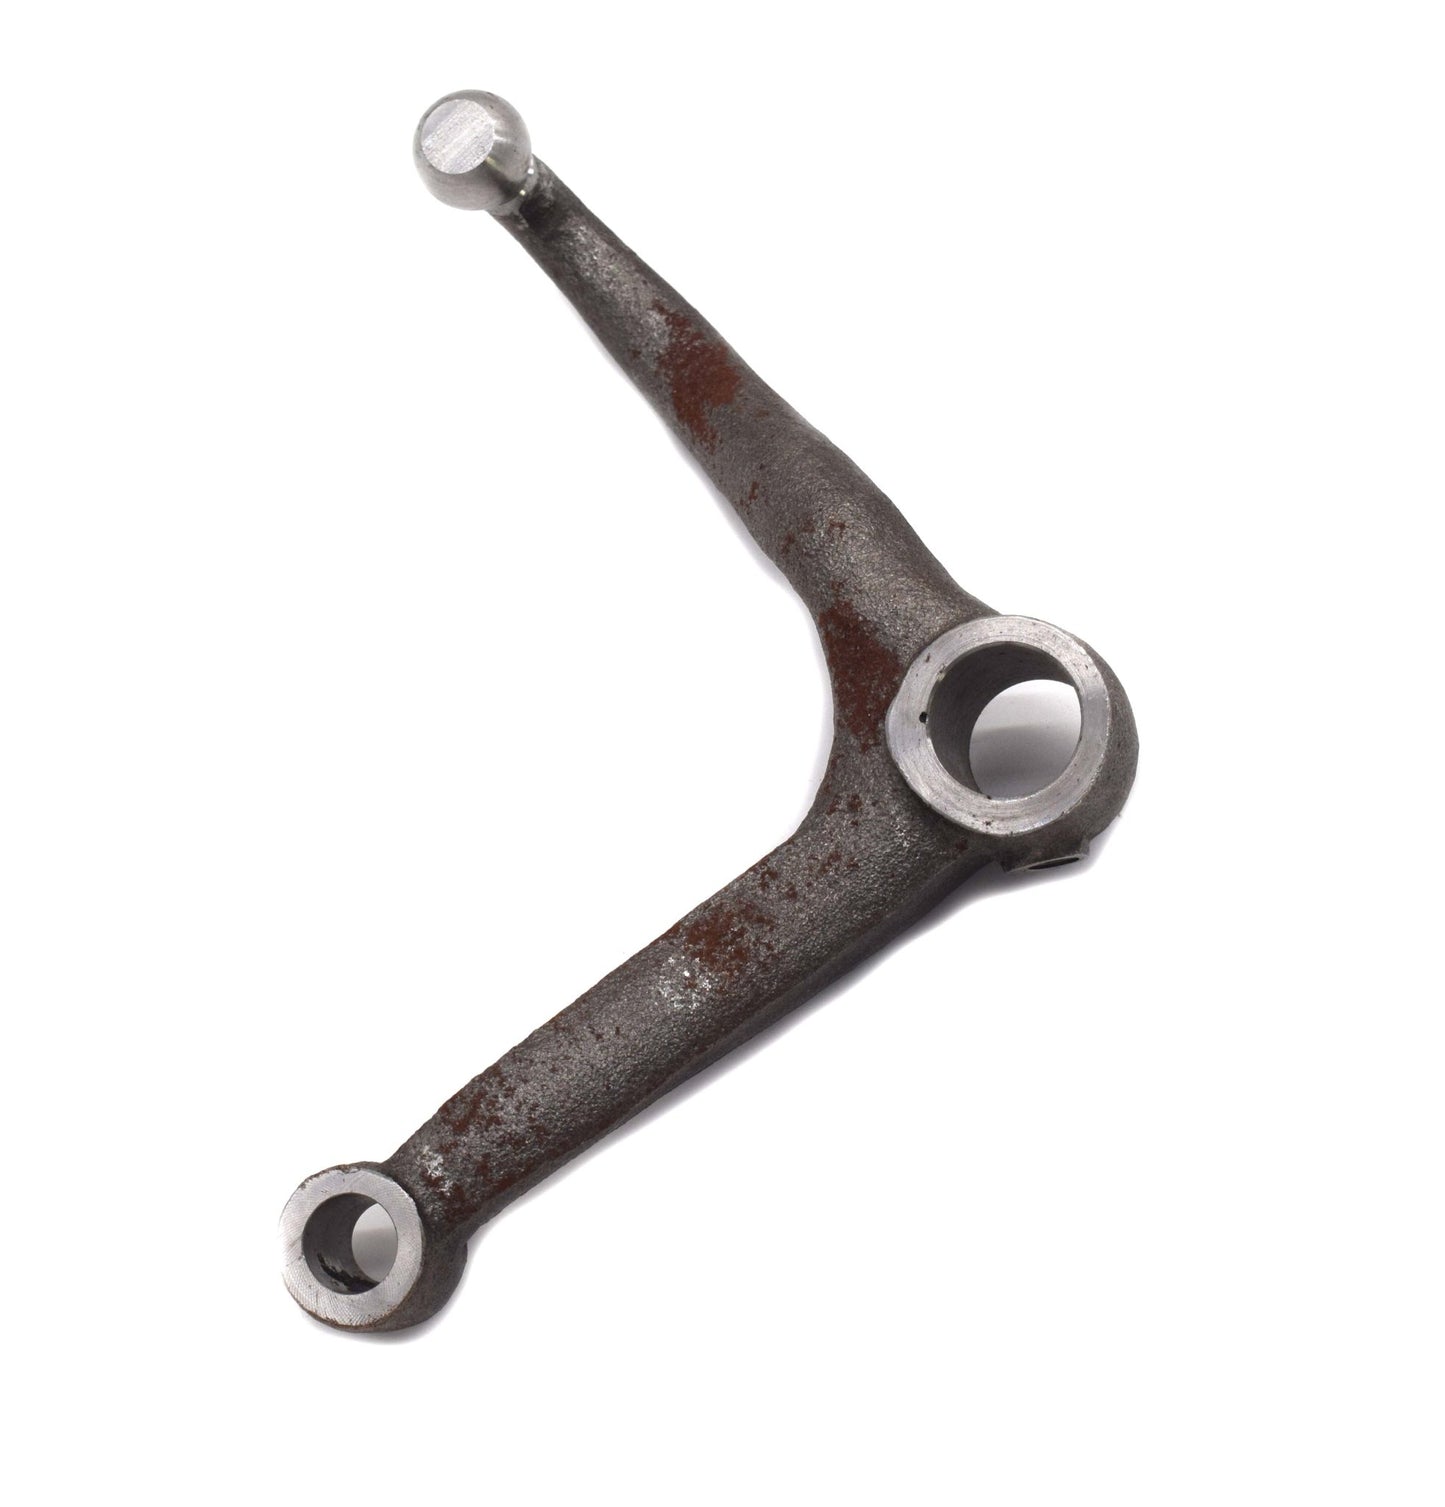 Steering Bell Crank (3/4'), 1946-1948 Willys CJ2A - The JeepsterMan